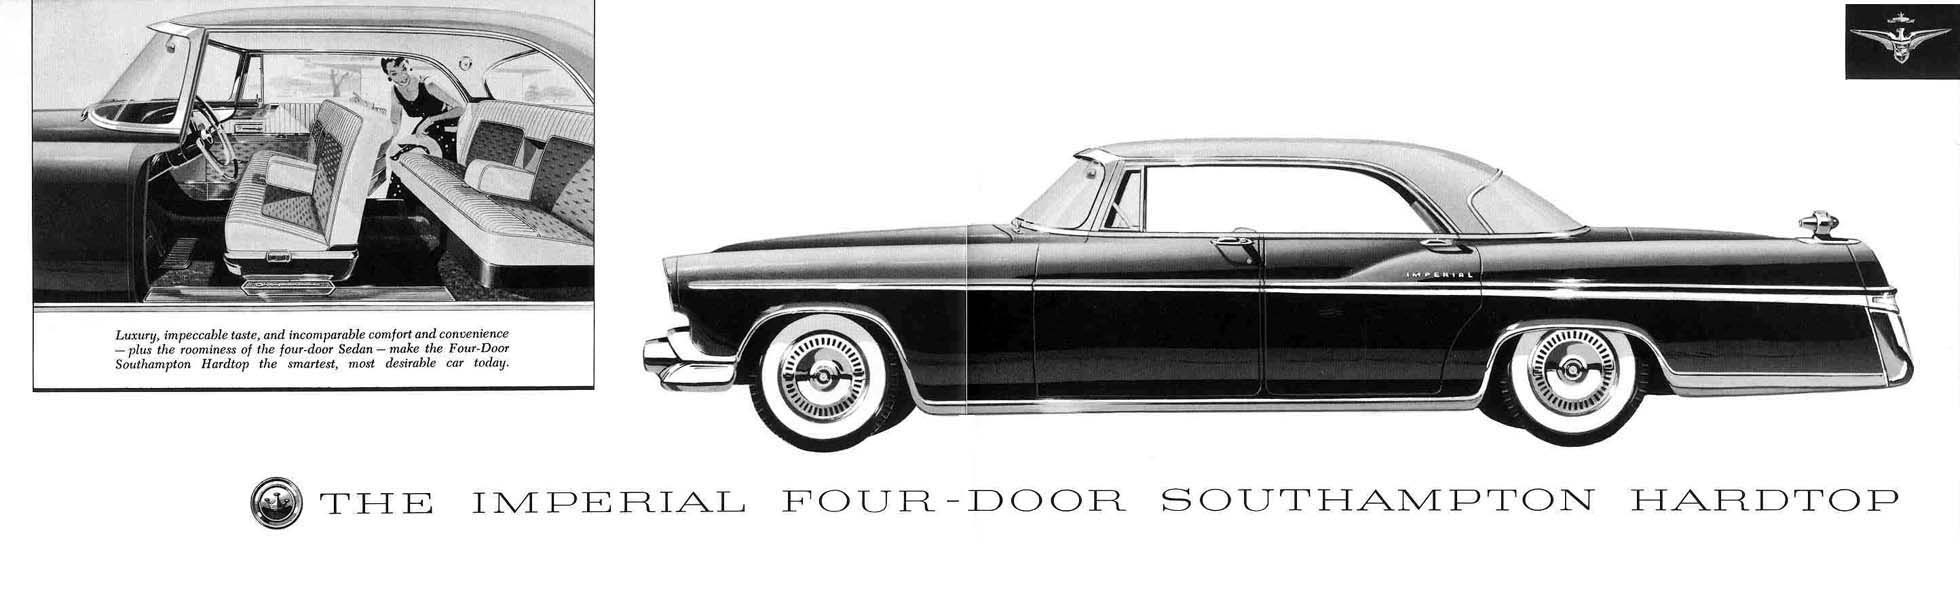 1956 Chrysler Imperial Brochure Page 1